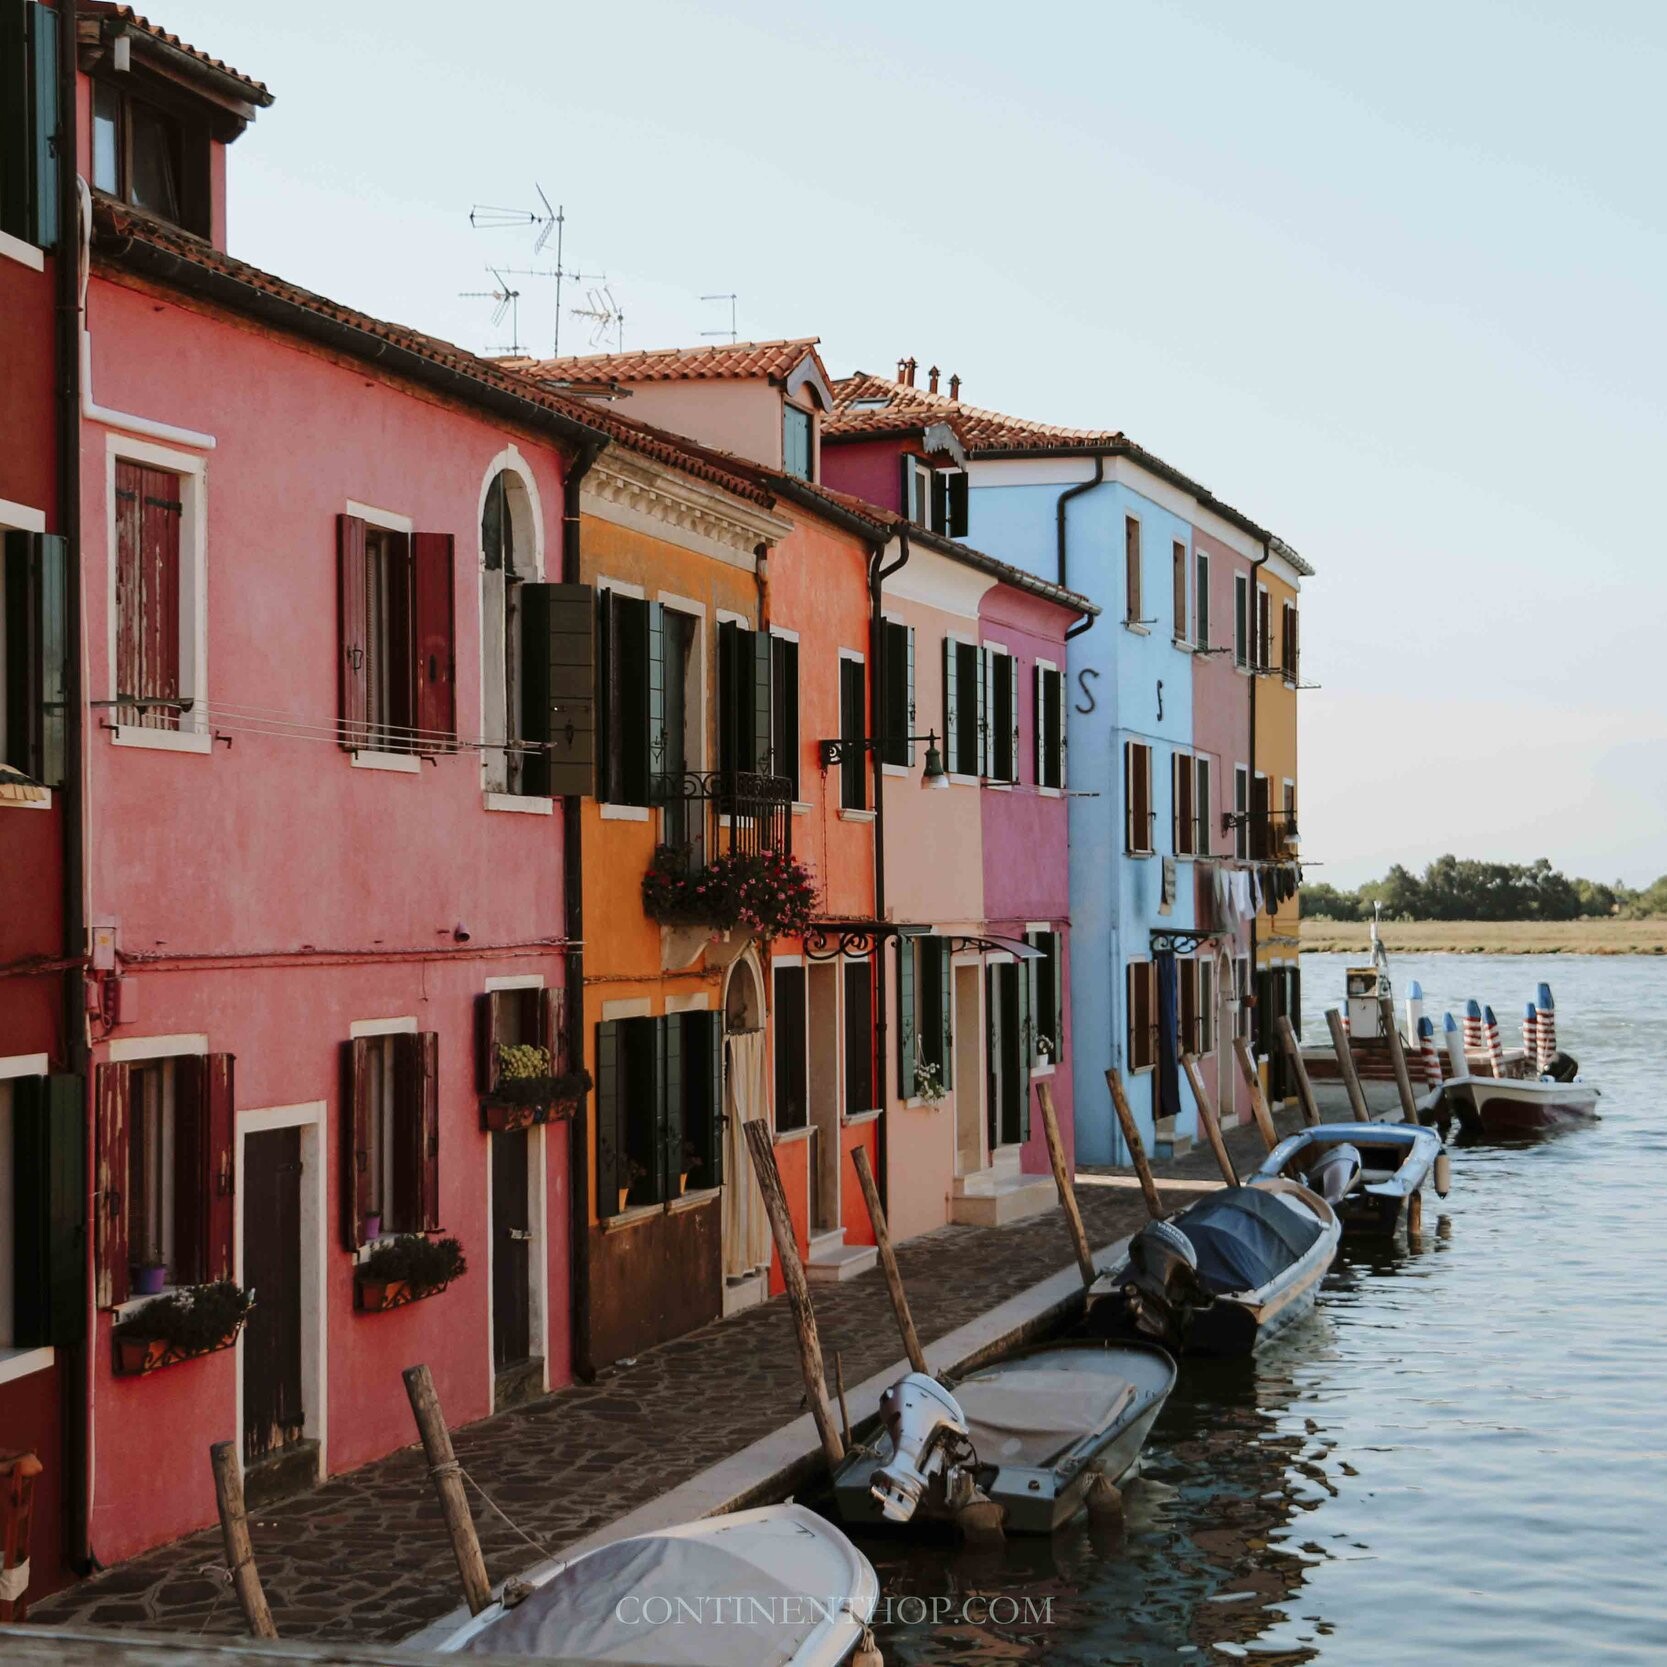 colorful houses in burano italy captions, quotes about italy travel, italy quotes funny, funny italy quotes, italy instagram captions